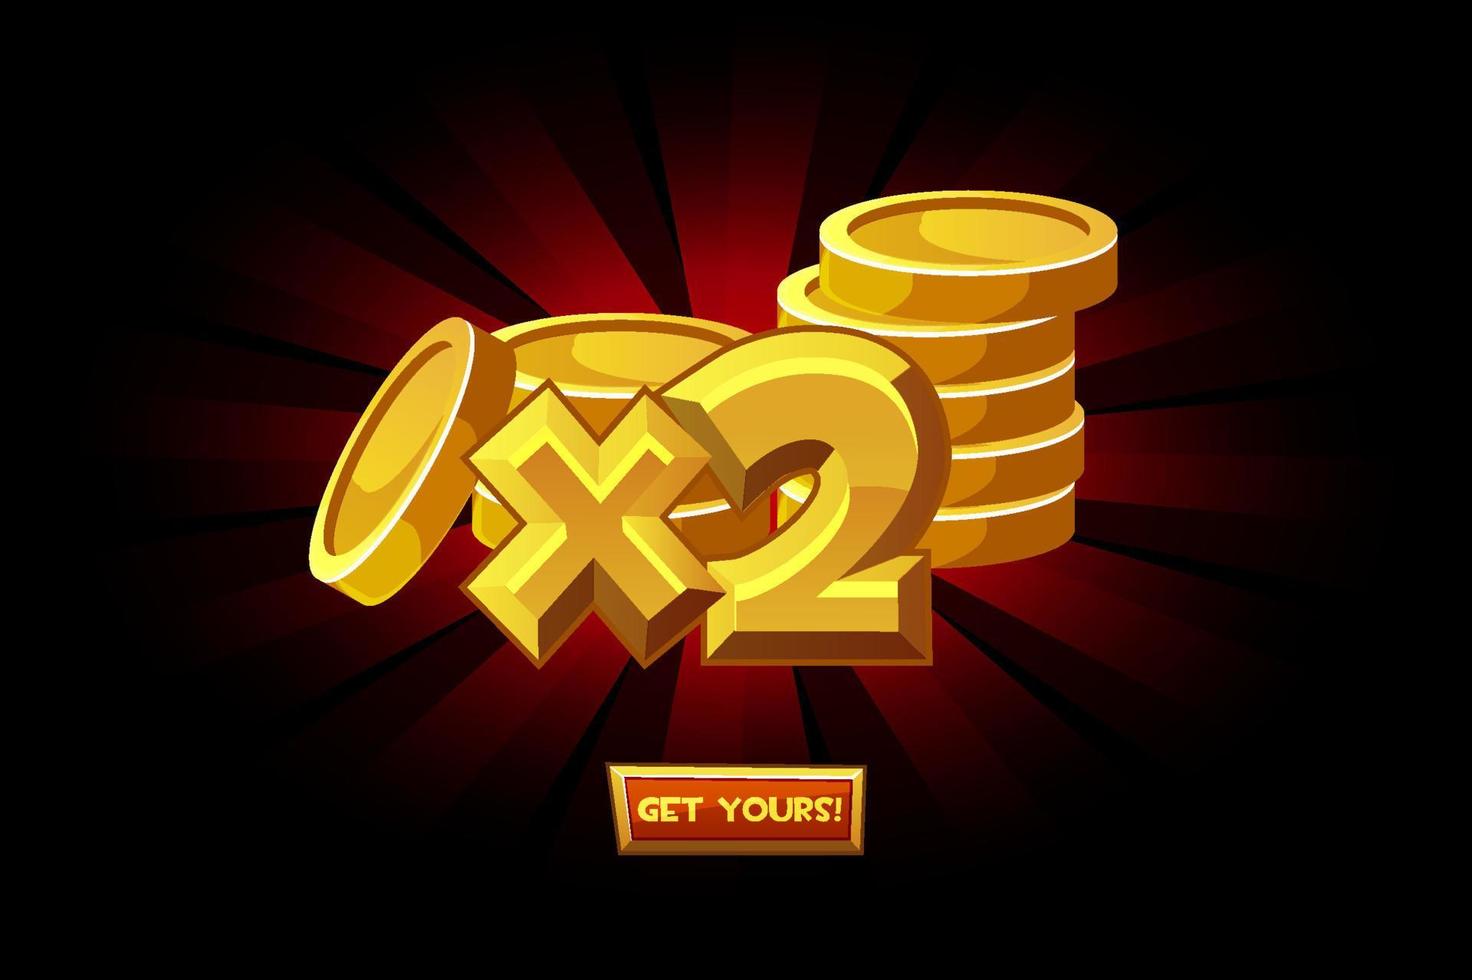 Vector icon of gold coins doubling bonus. Illustration of X2 winning the game, luck, prize.